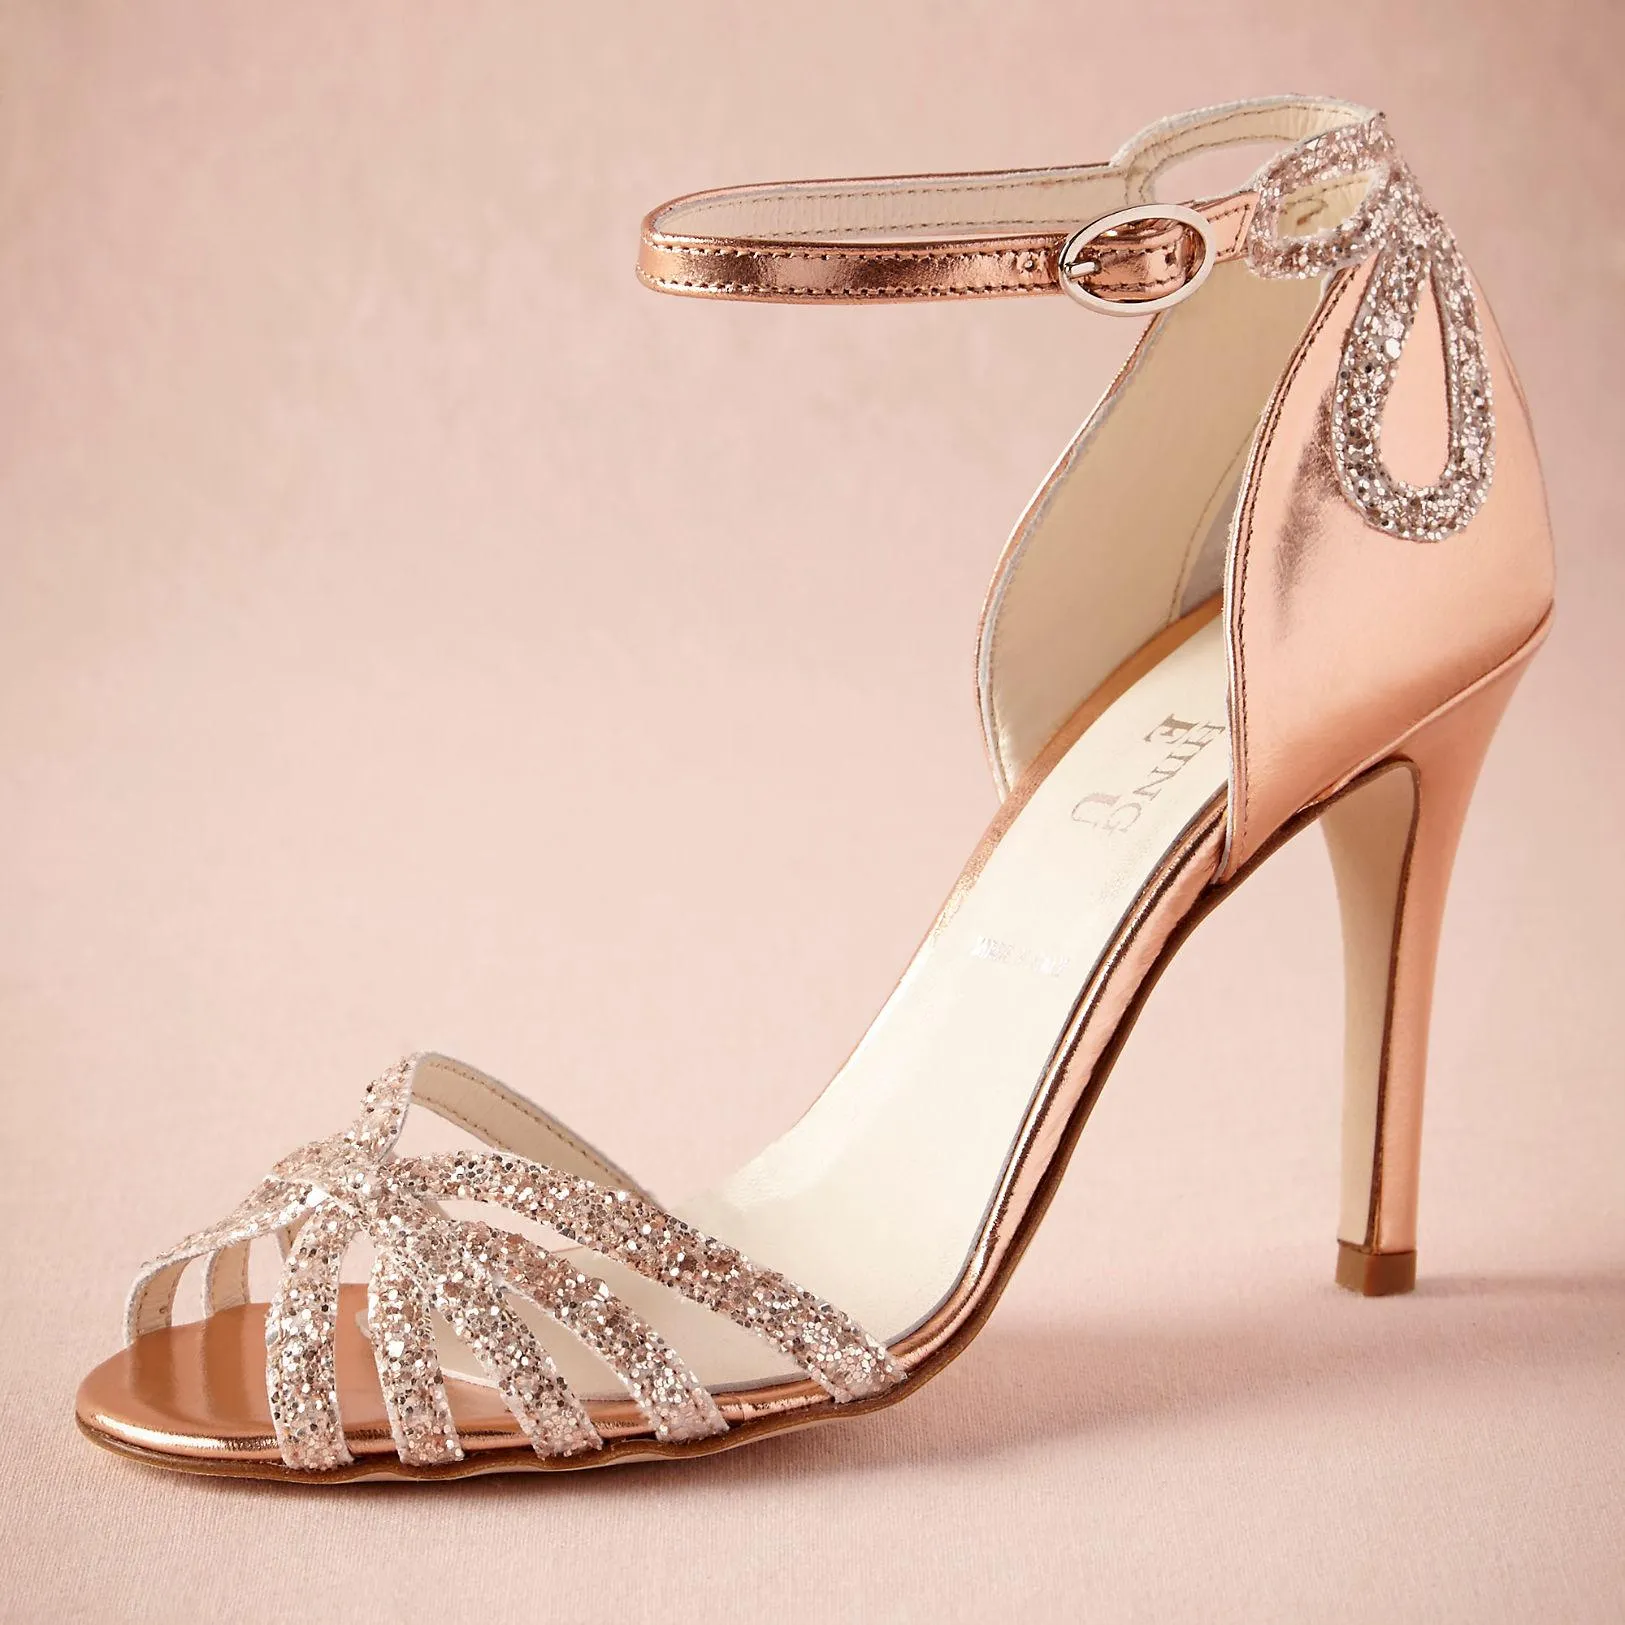 Rose Gold Glittered Heel Real Wedding Shoes Pumps Sandals Gold Leather Buckle Closure Glitter Party Dance High Wrapped Heels Women258y